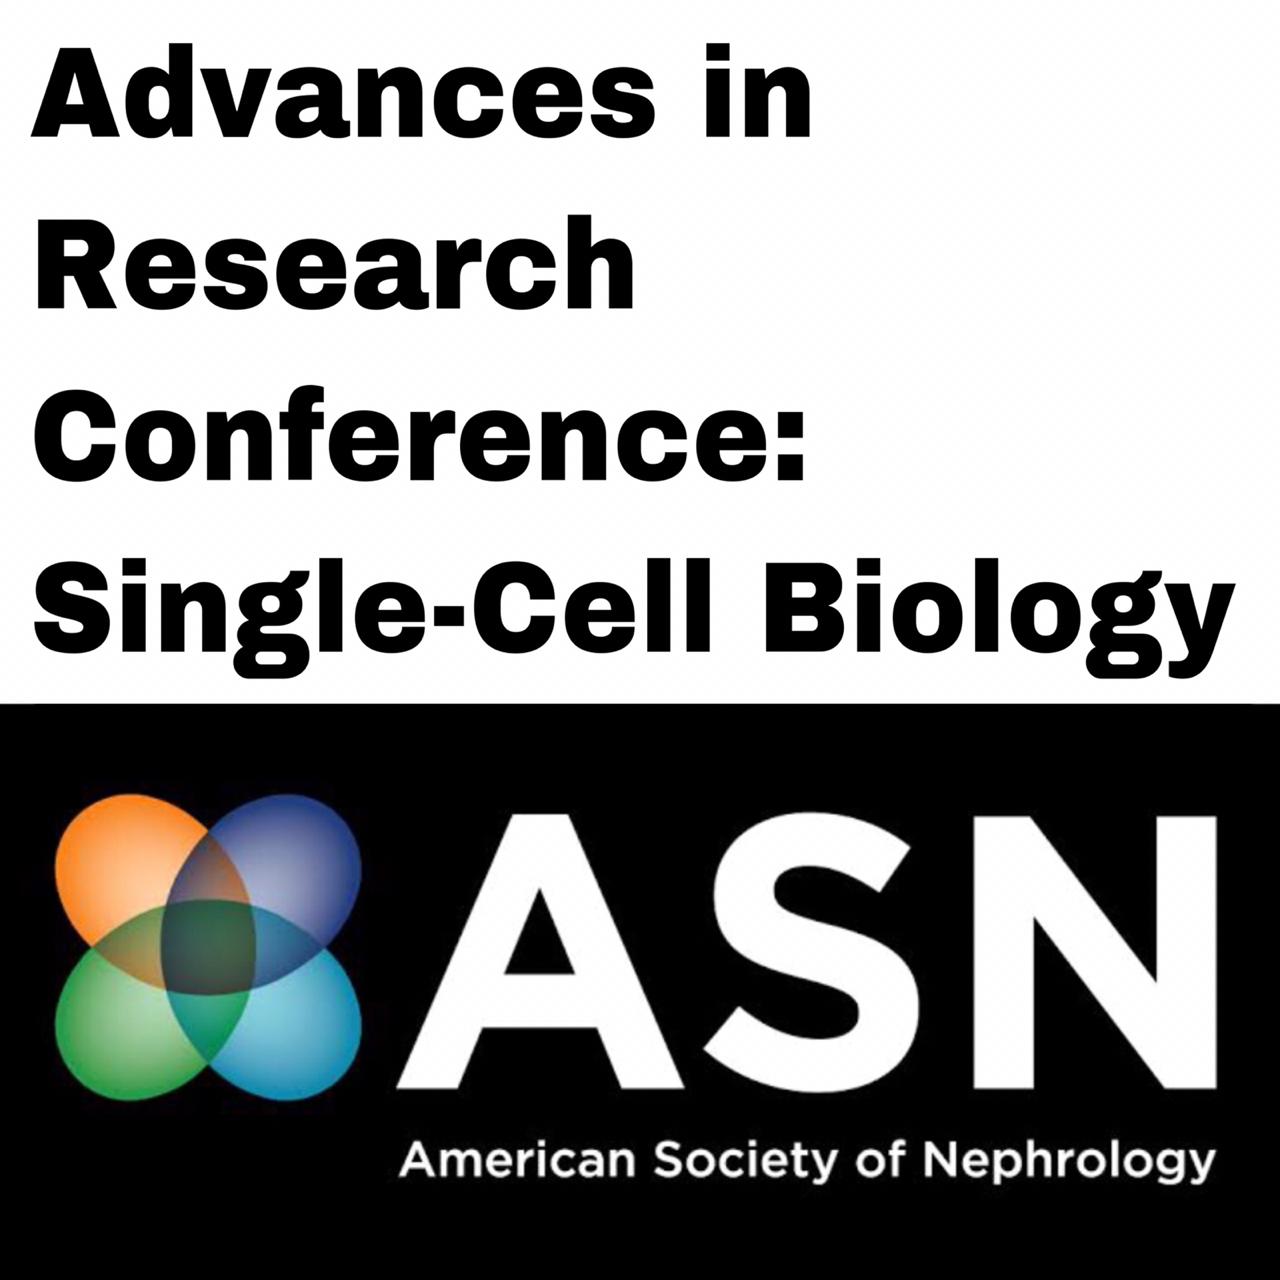 Advances in Research Conference Single-Cell Biology